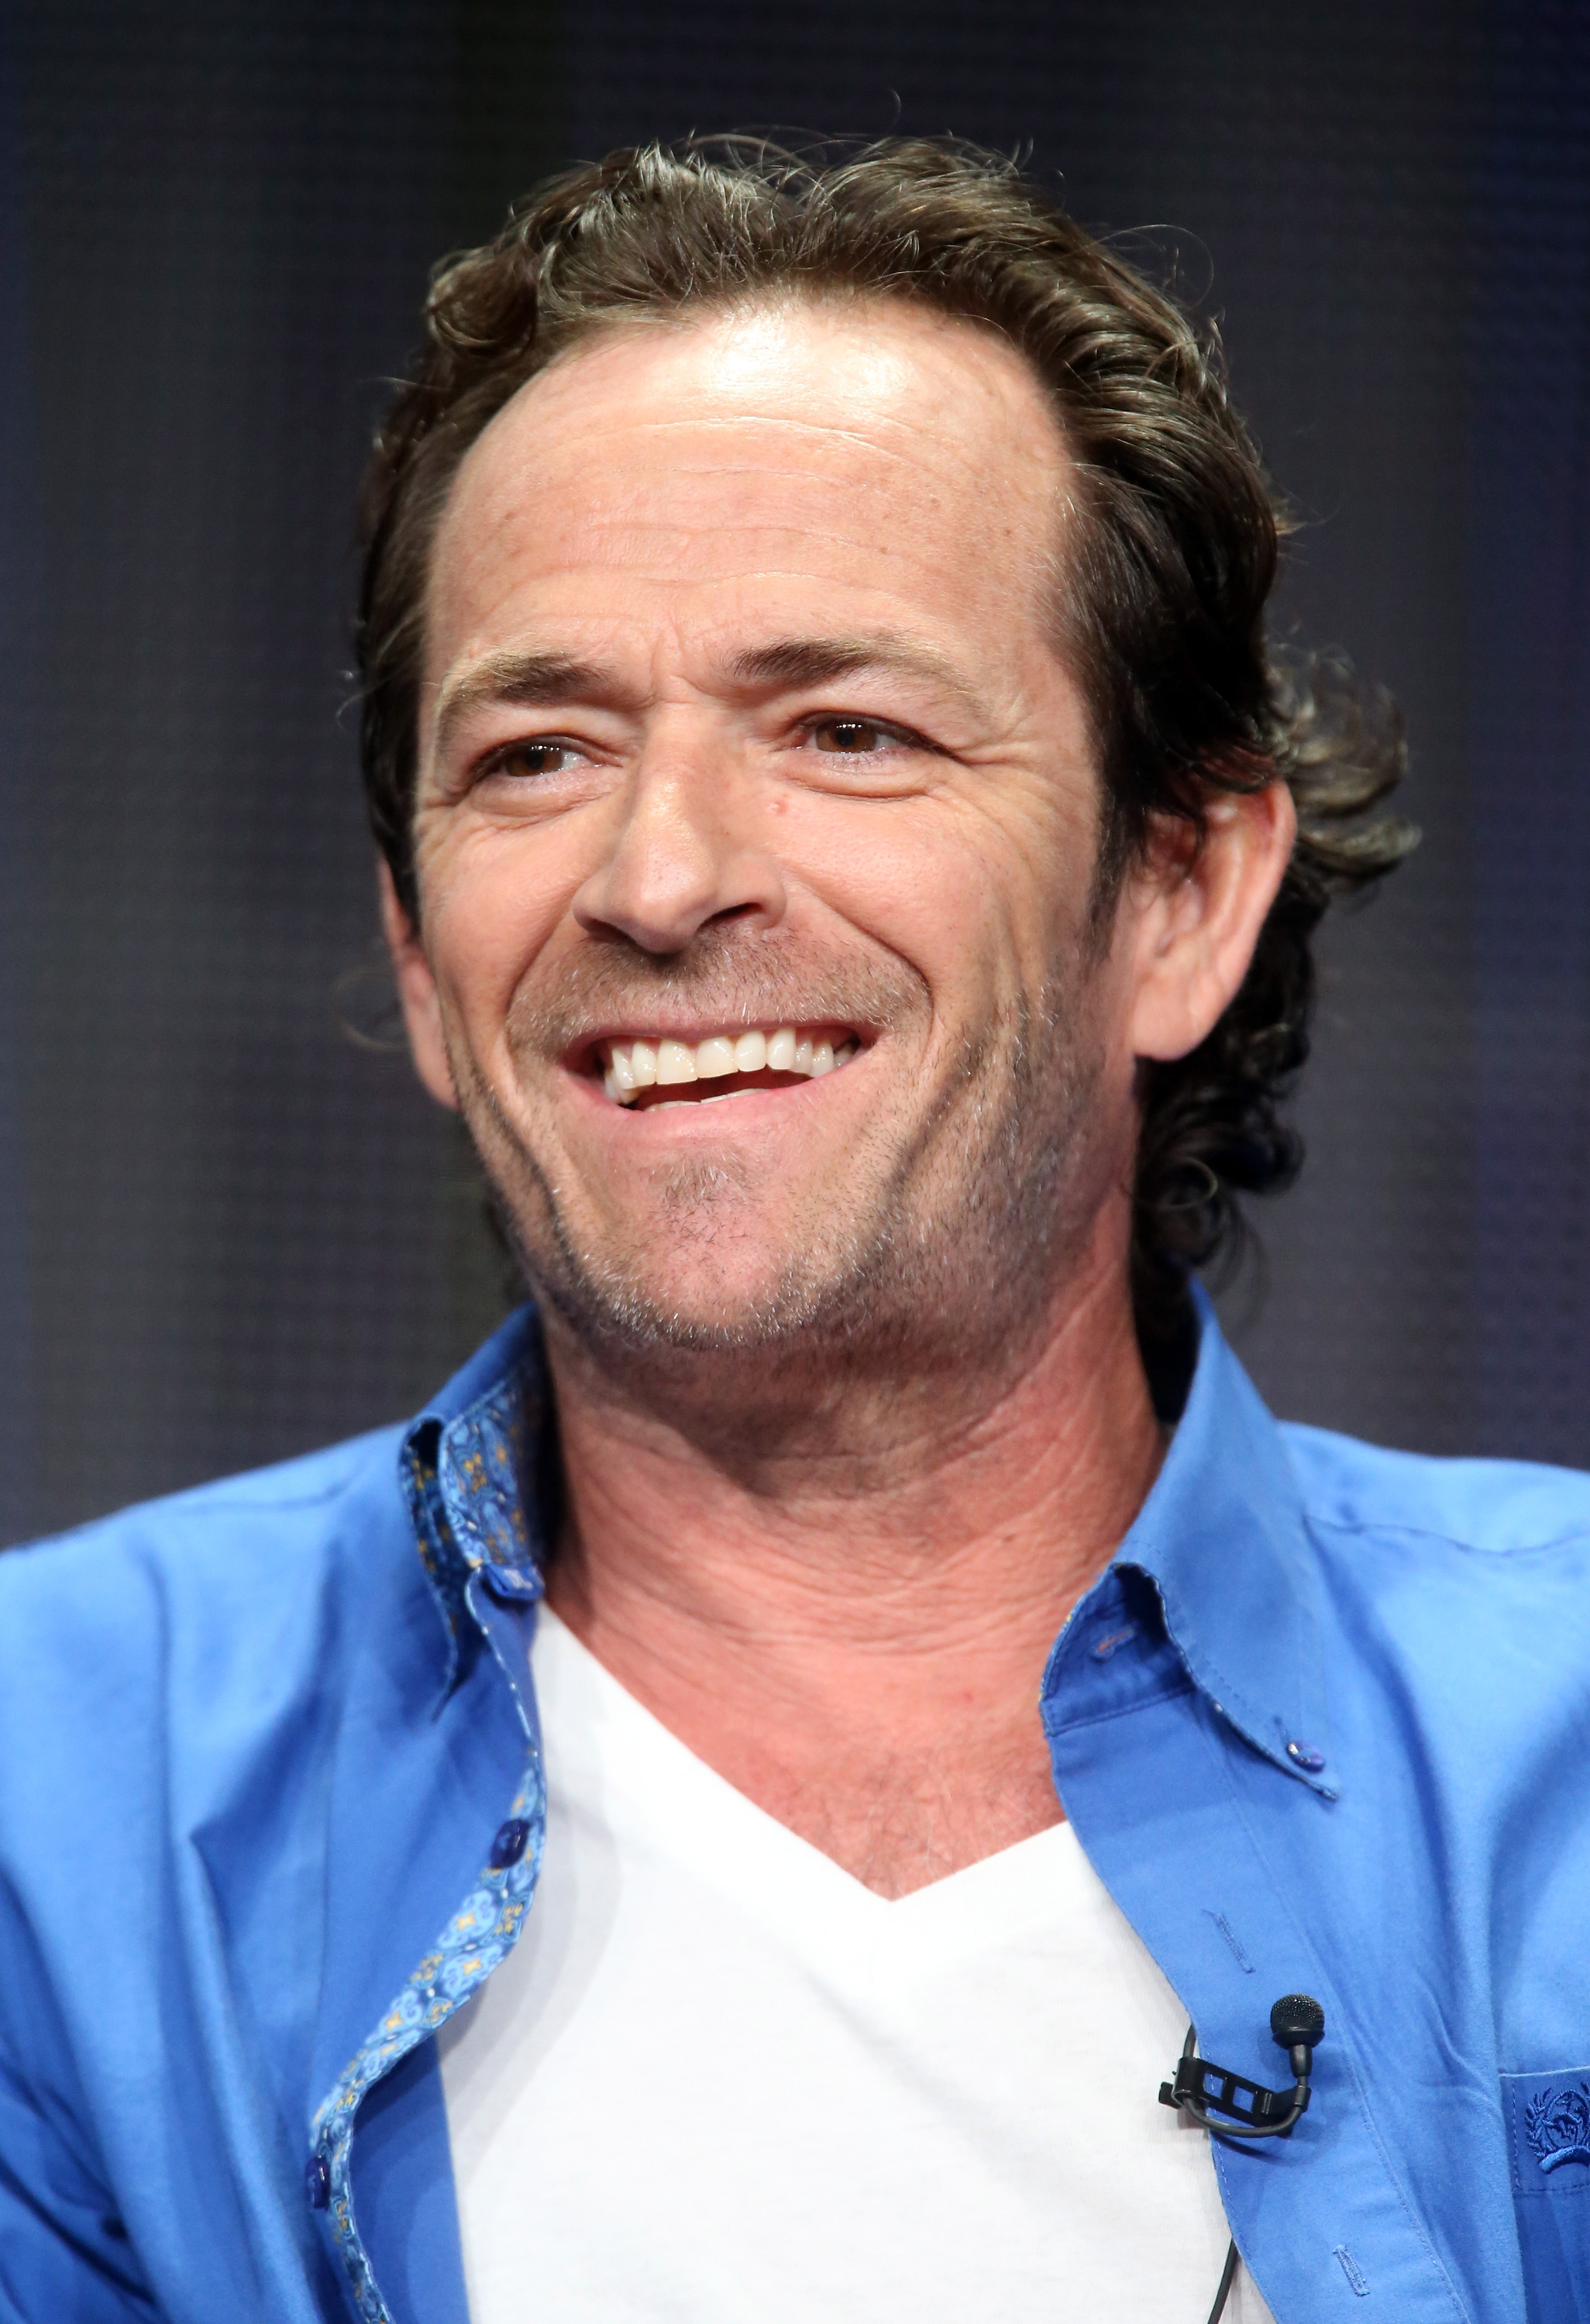 Luke Perry speaking at a panel in Los Angeles in 2015 | Source: Getty Images